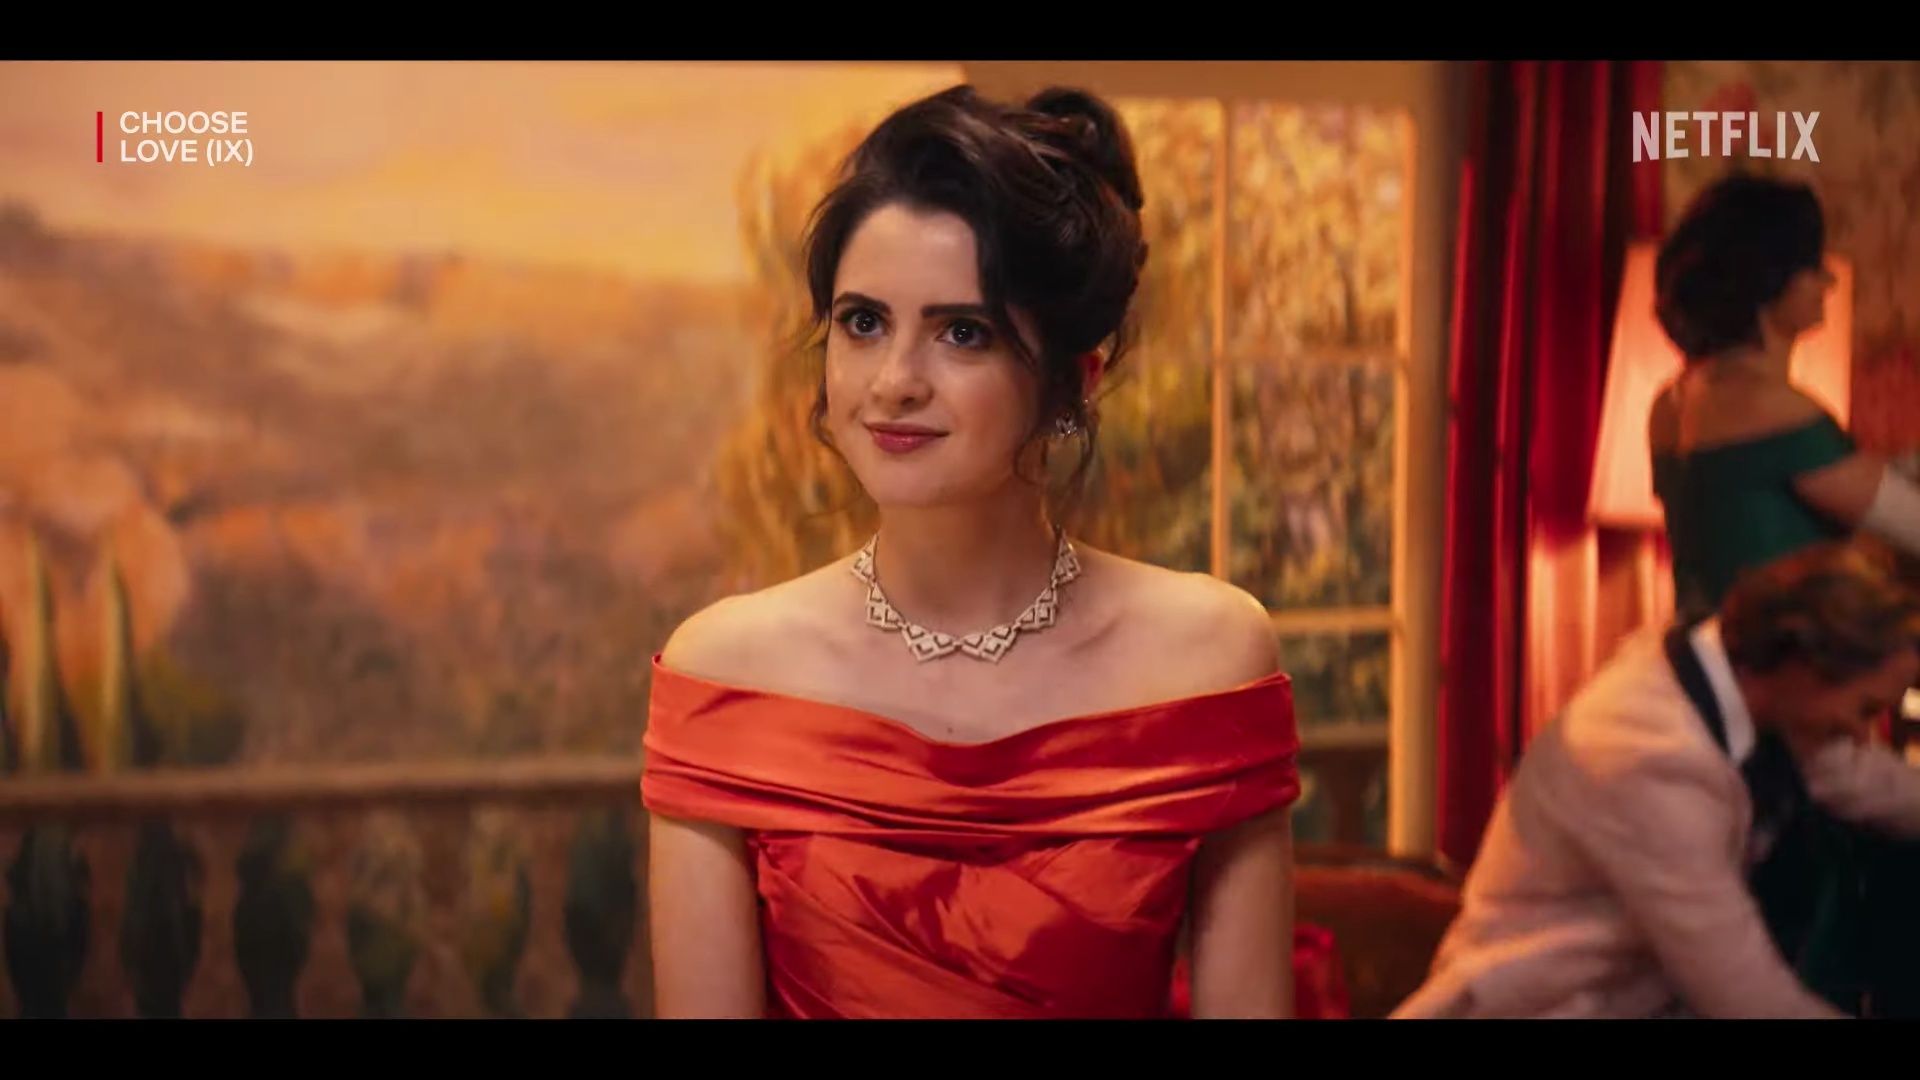 Worn on Choose Love (2023) Movie - Necklace of Laura Marano as Cami